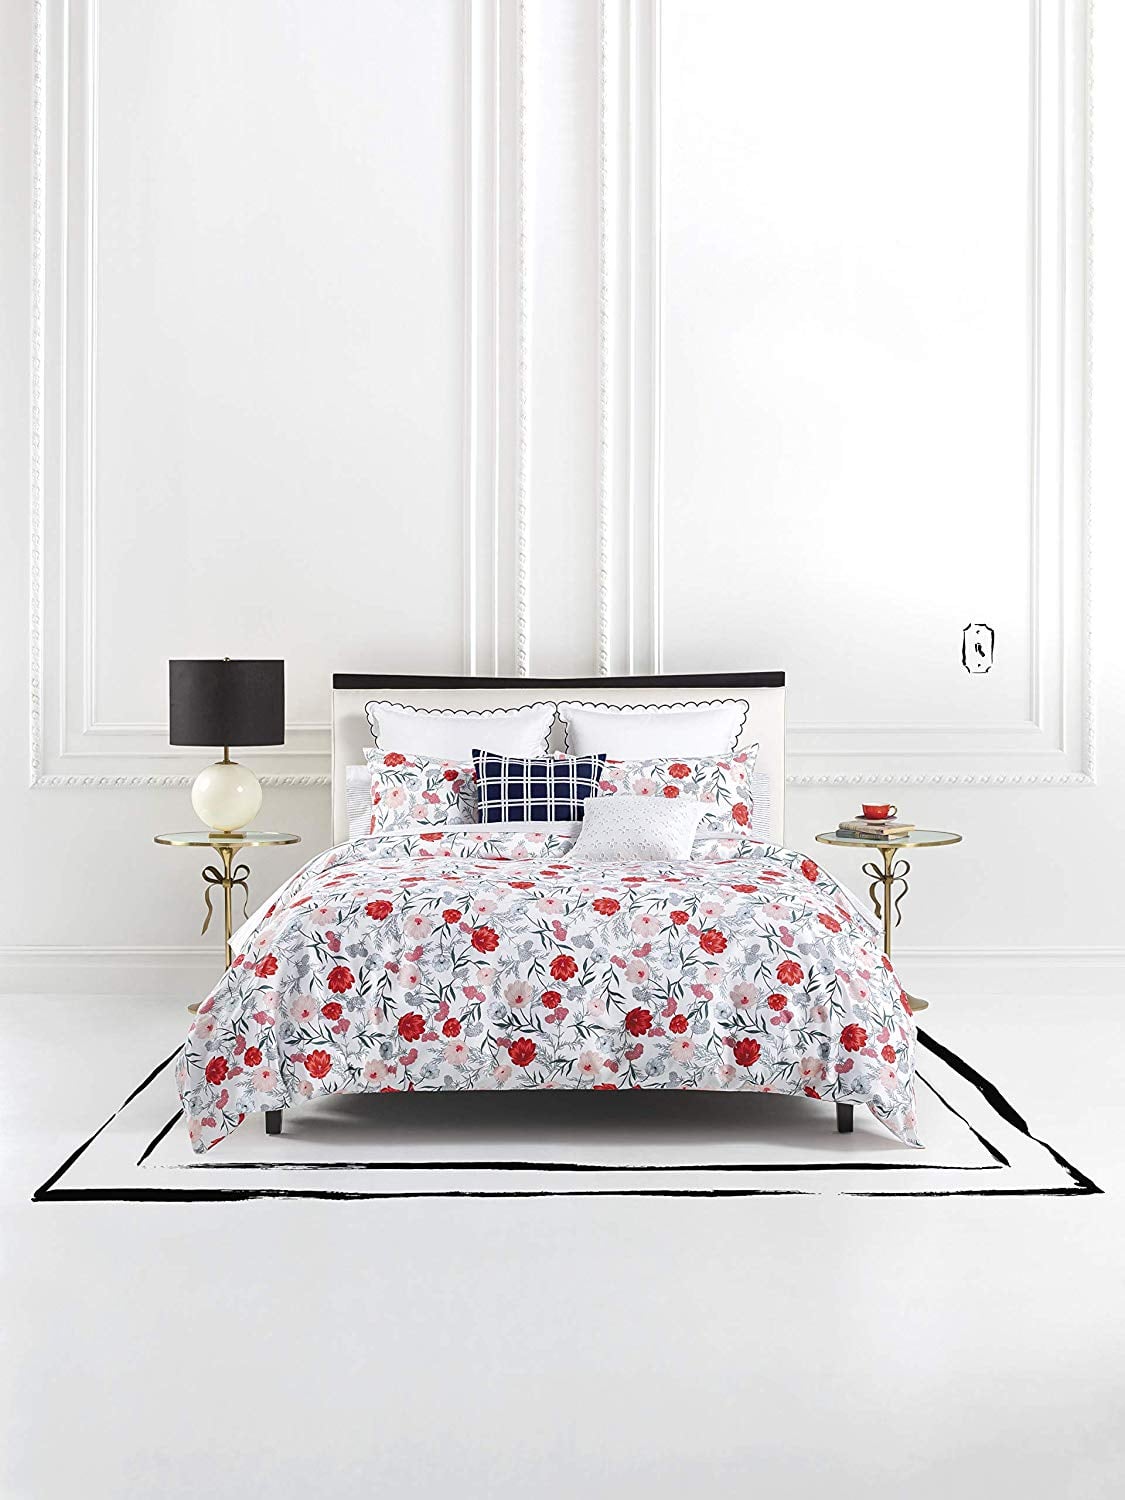 Kate Spade New York Blossom Full/Queen Comforter Set Bedding | Shhh . . .  Amazon Has a Secret Section Filled With Kate Spade Goodies, Perfect For  Gifting | POPSUGAR Fashion Photo 22